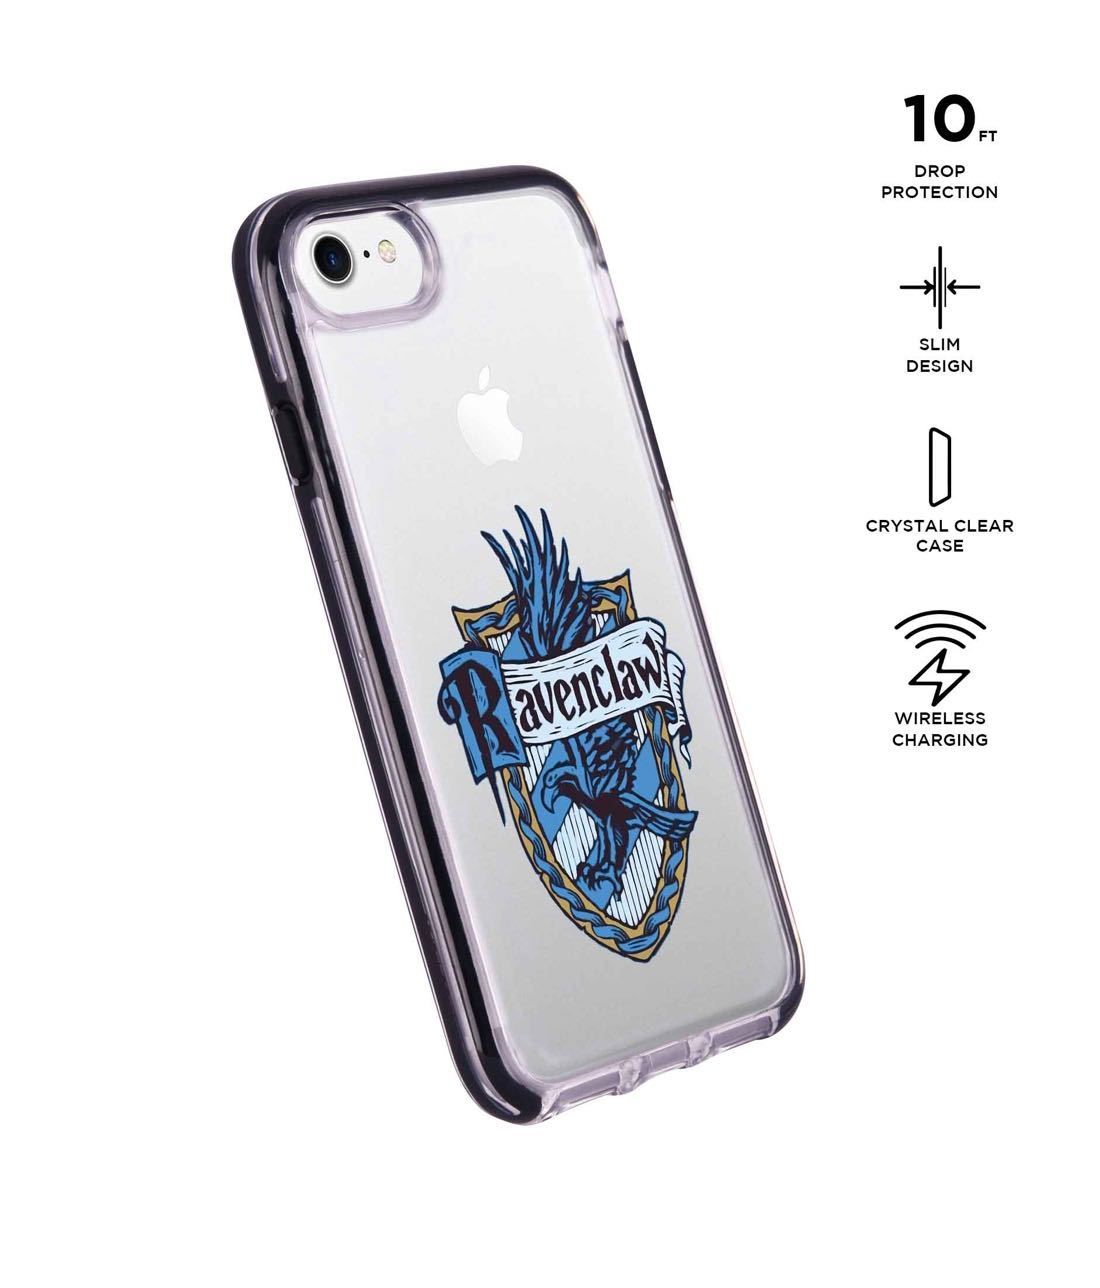 Crest Ravenclaw - Extreme Phone Case for iPhone 7